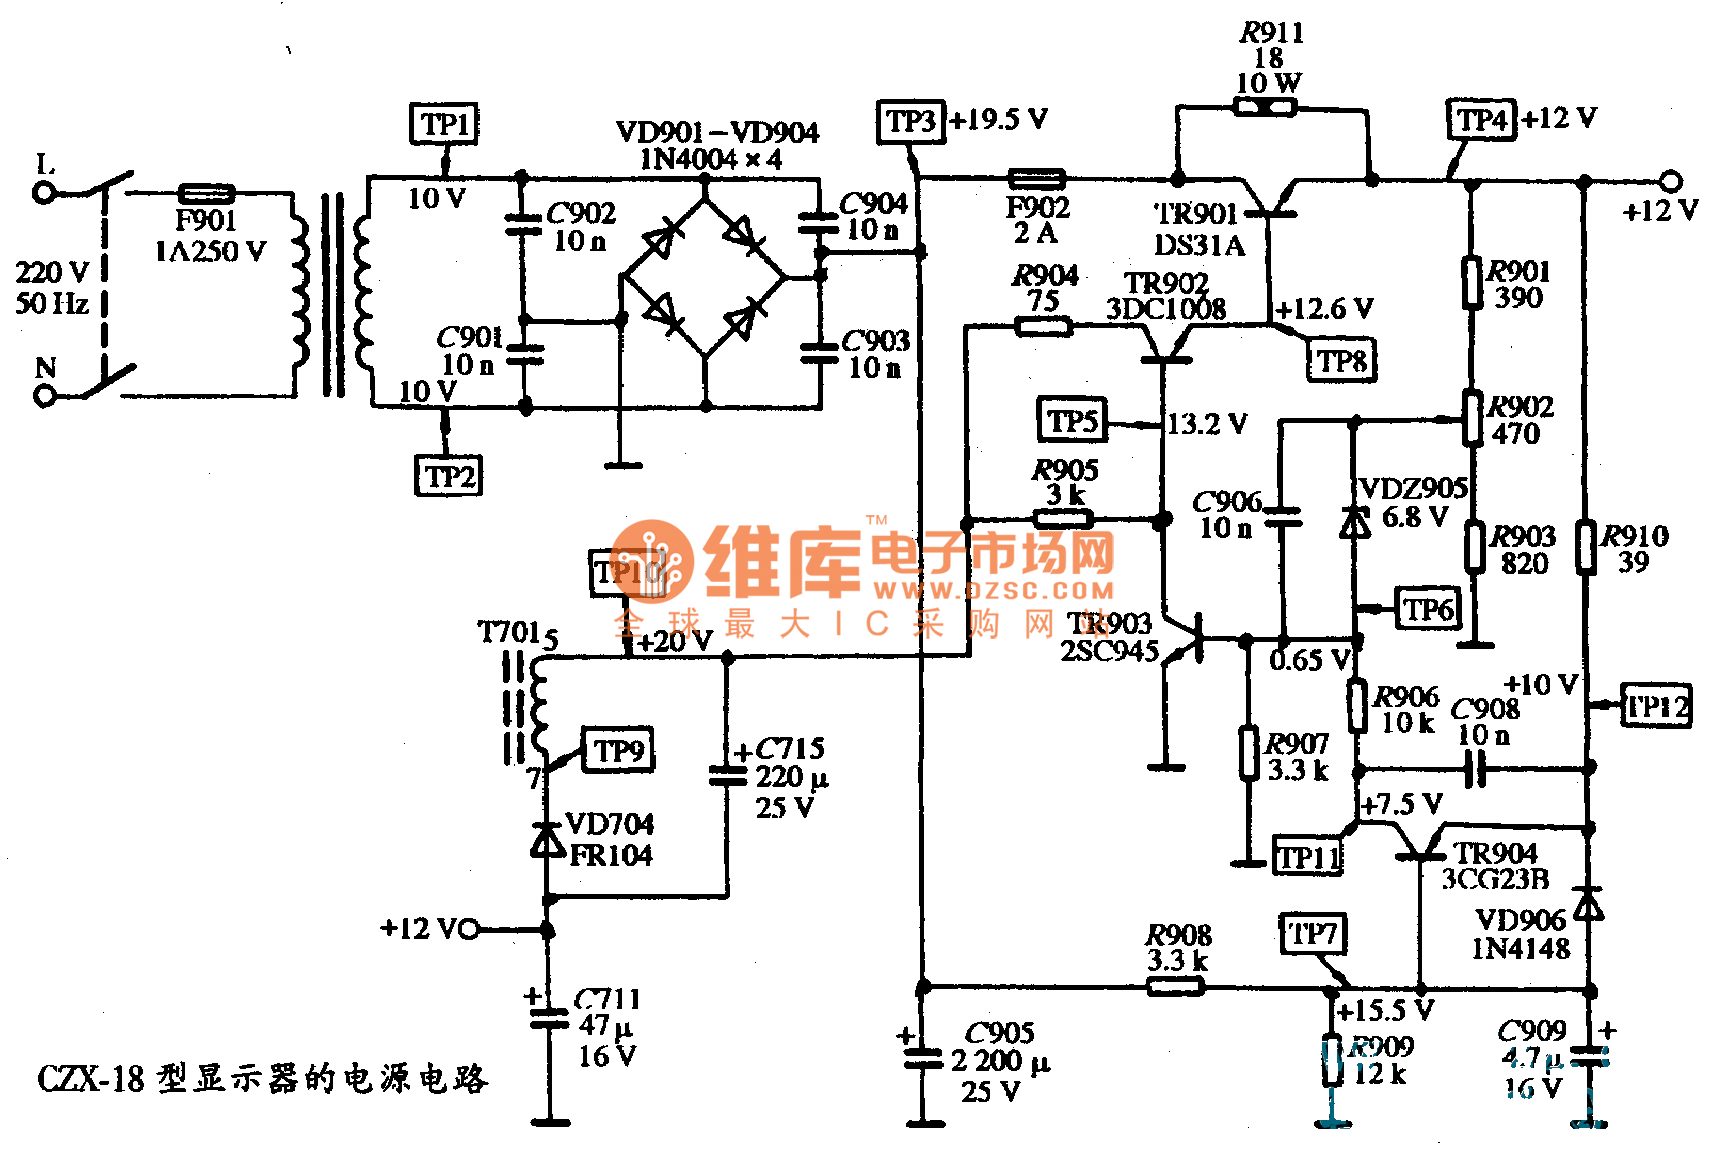 The power supply circuit diagram of CZX-18 type display - Power_Supply